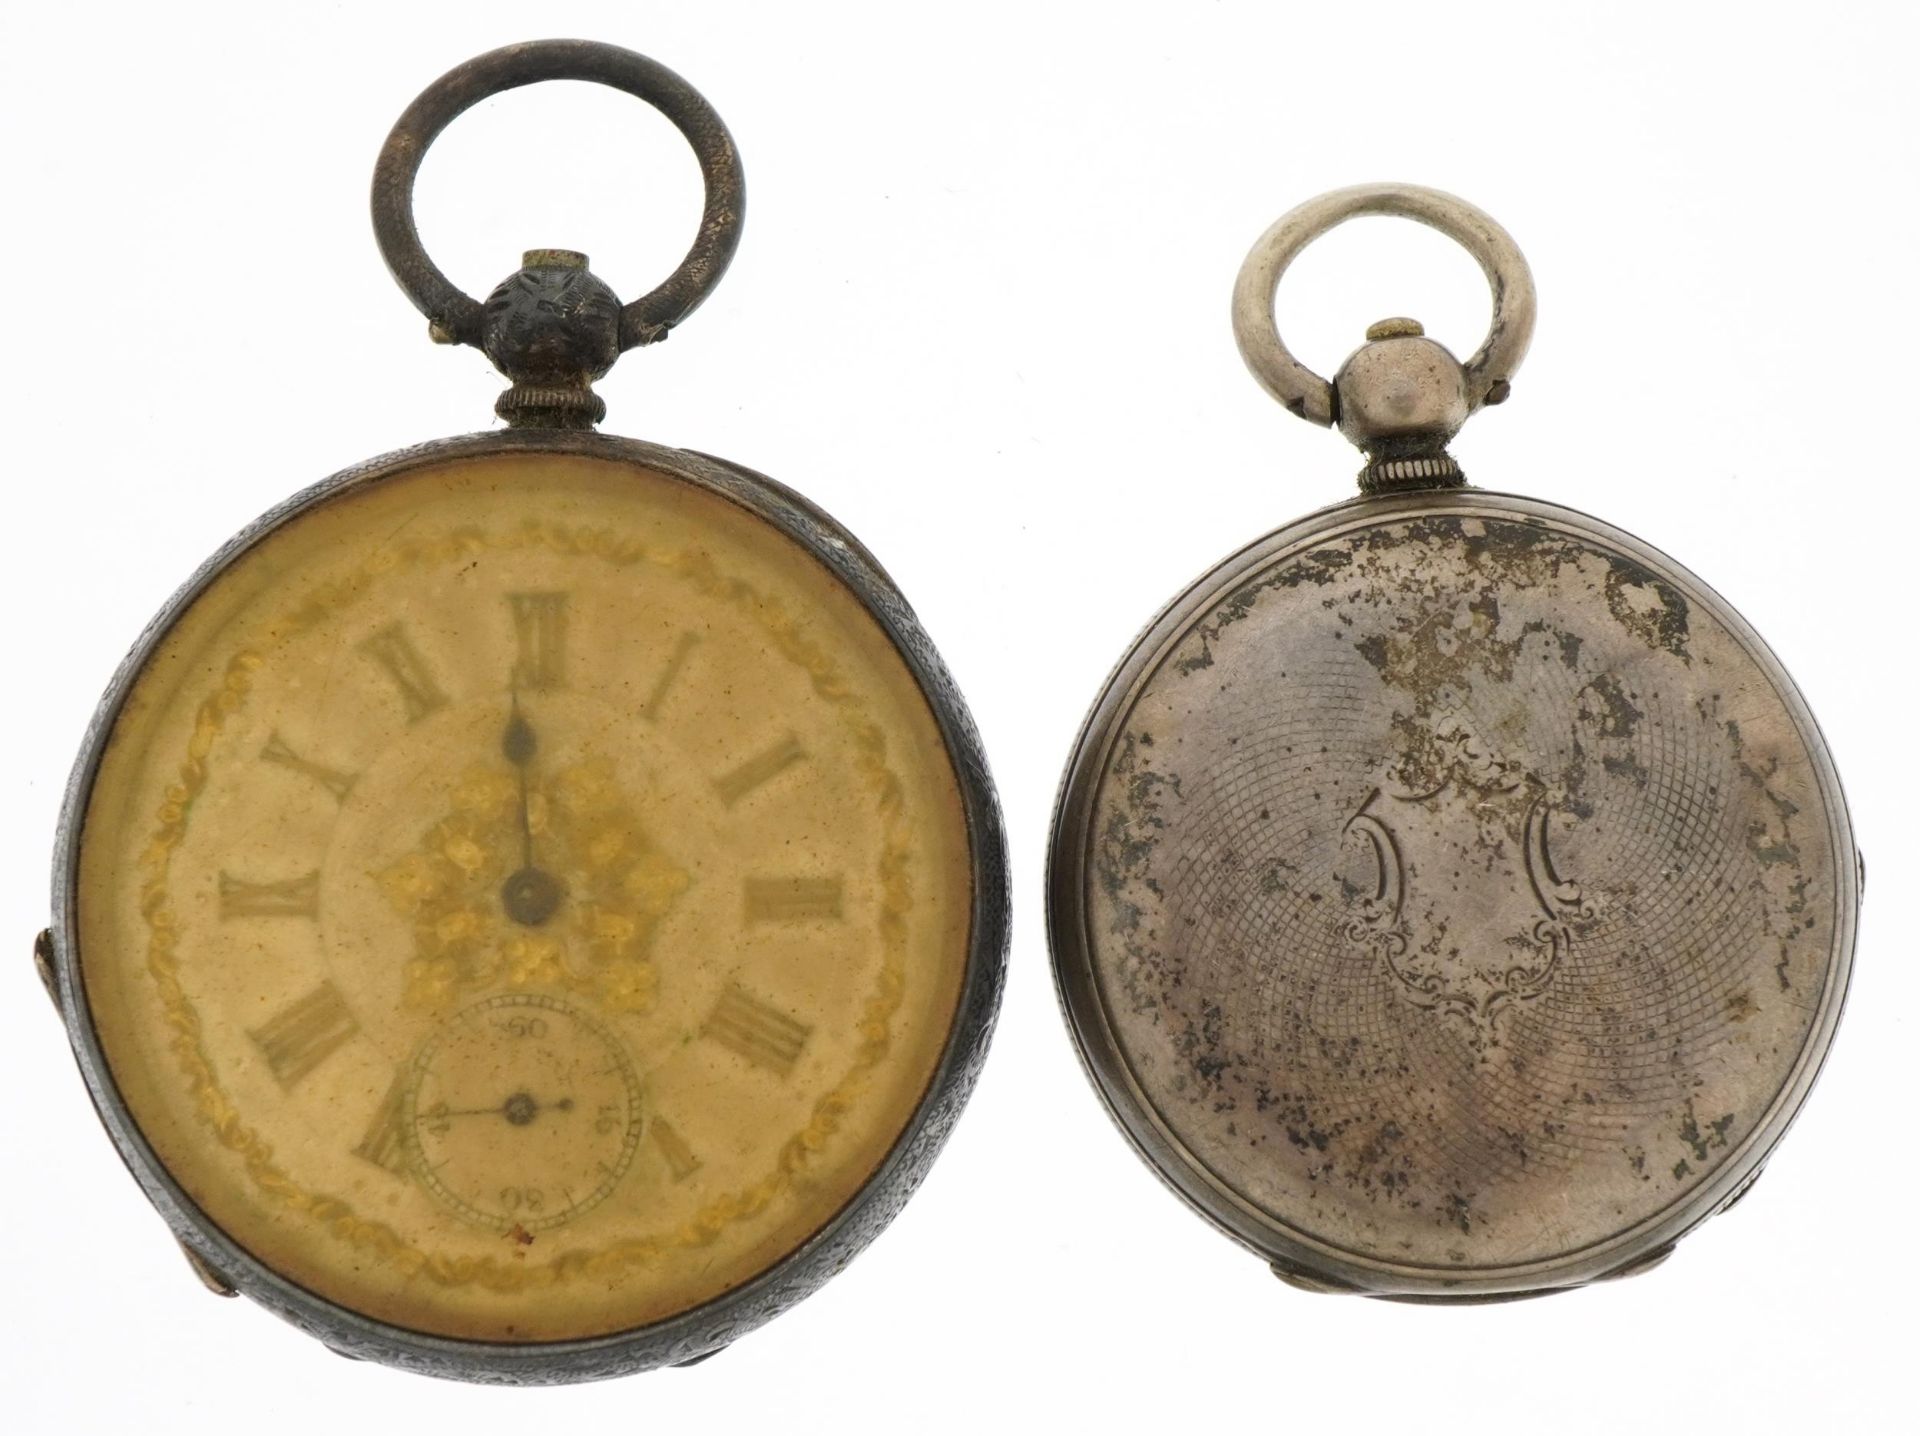 Gentlemen's silver open face pocket watch with silvered dial and silver full hunter pocket watch, - Image 2 of 5